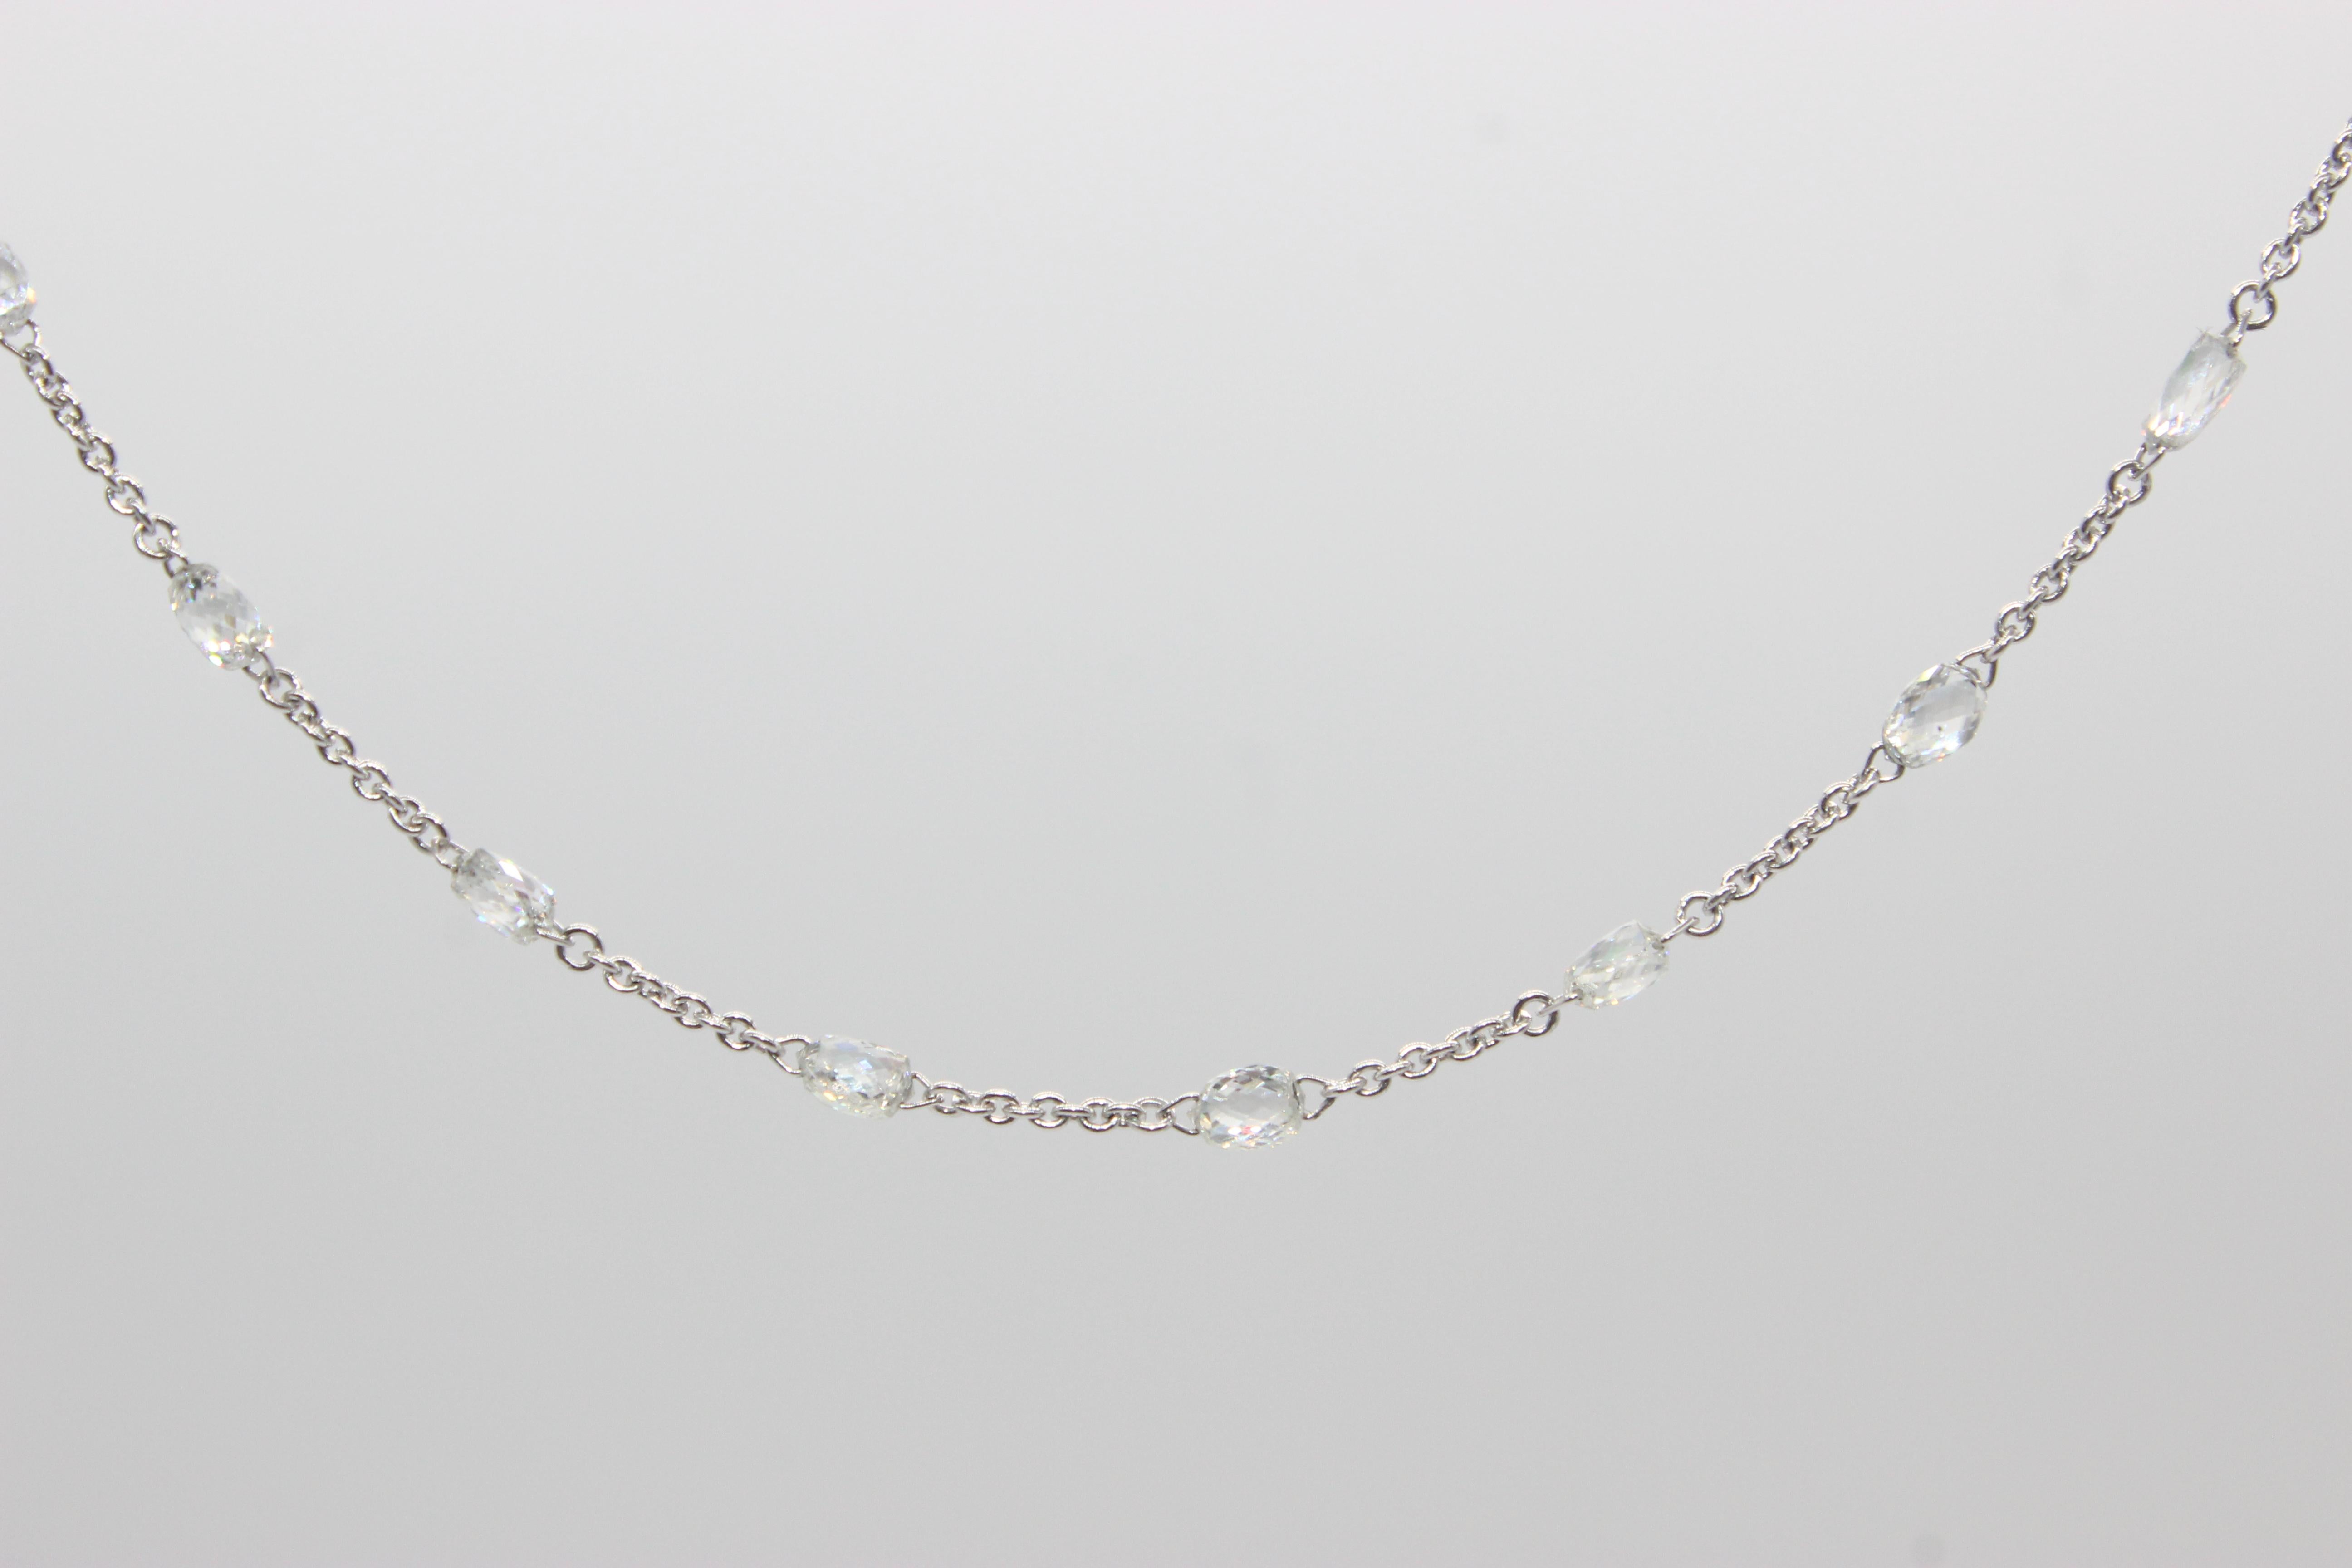 Panim 5.72 Carats Briolette Diamonds 18K White Gold Necklace

This necklace is straight from our classic collection, created using 35 briolette diamonds, the briolettes are placed evenly throughout 18 inches. The briolette diamonds are linked to